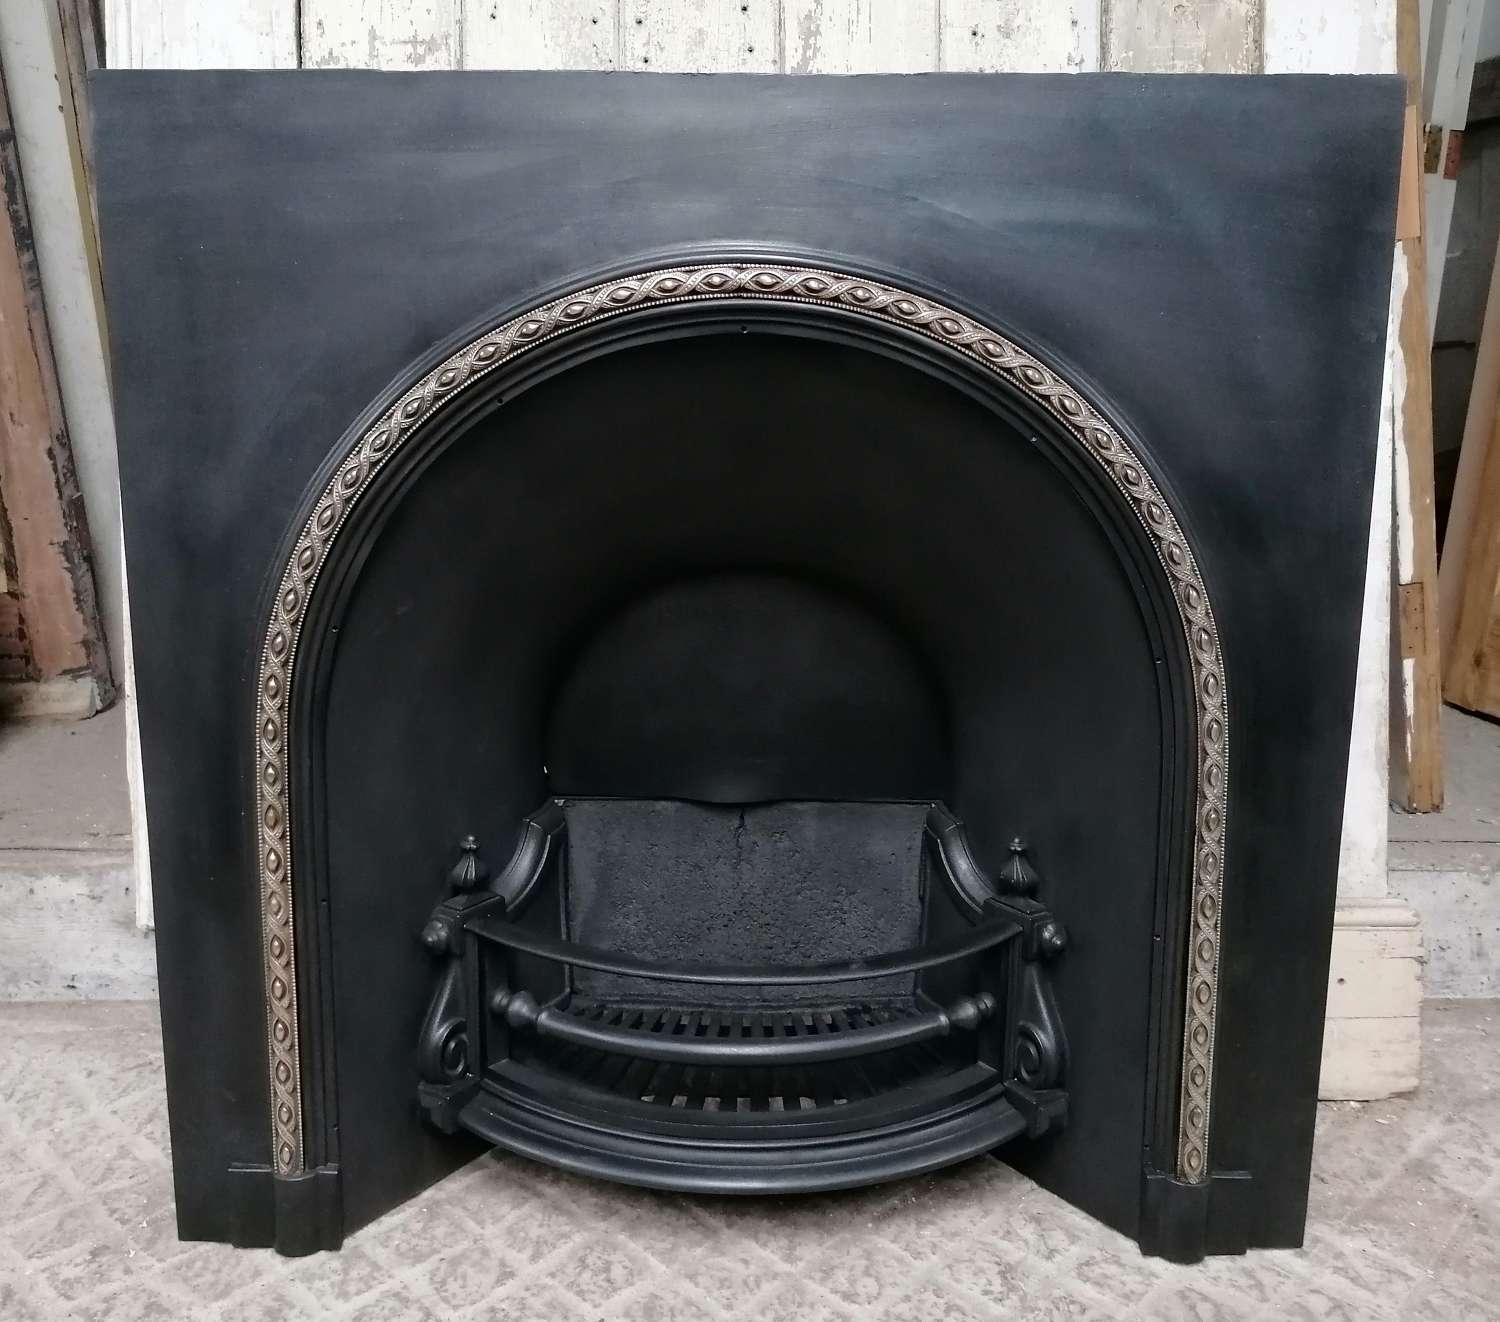 FI0050 A RECLAIMED EARLY VICTORIAN LARGE CAST IRON FIRE INSERT